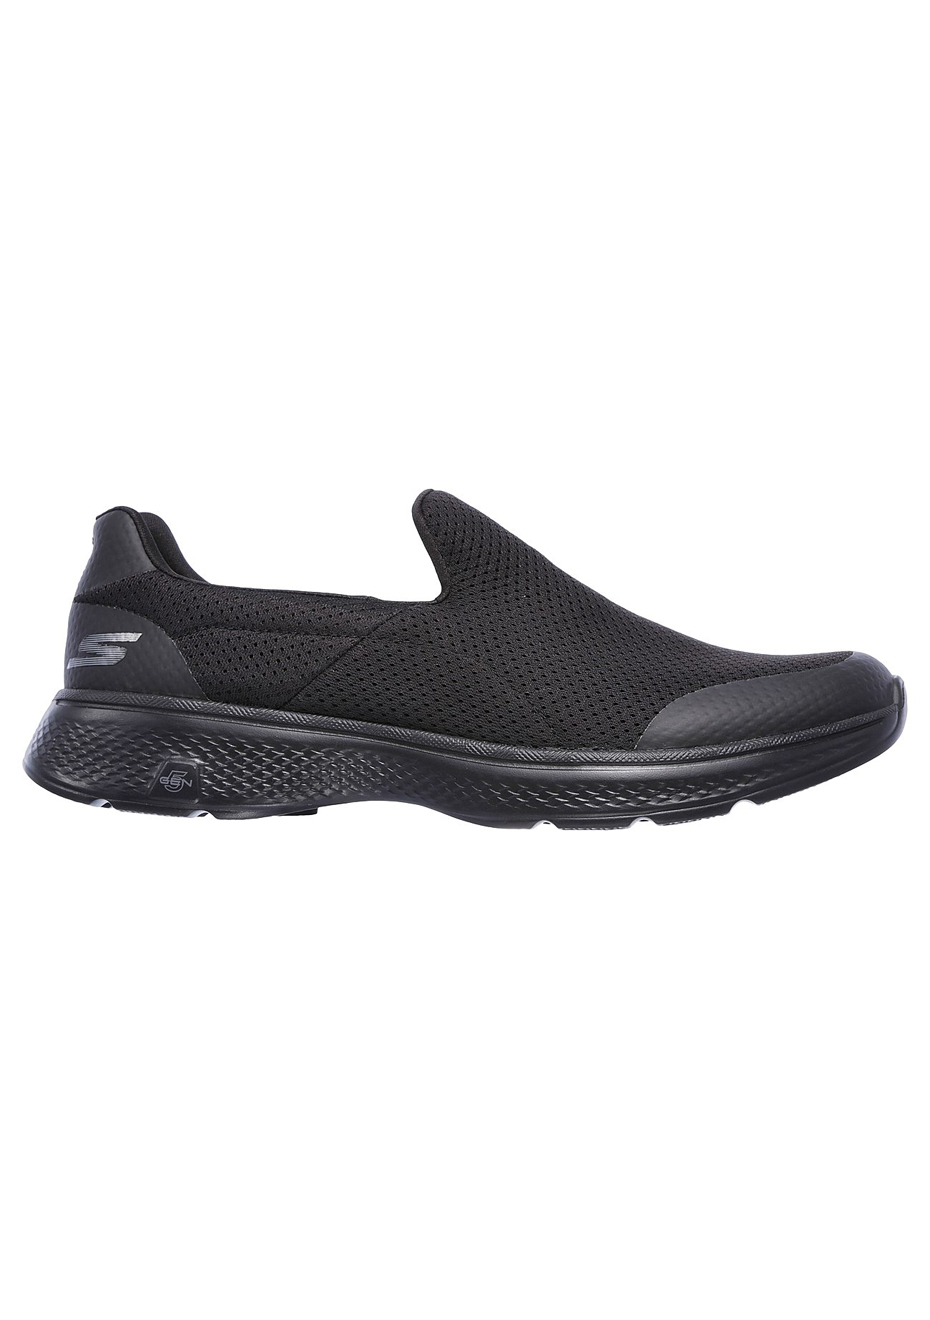 skechers goga max nz Sale,up to 74 